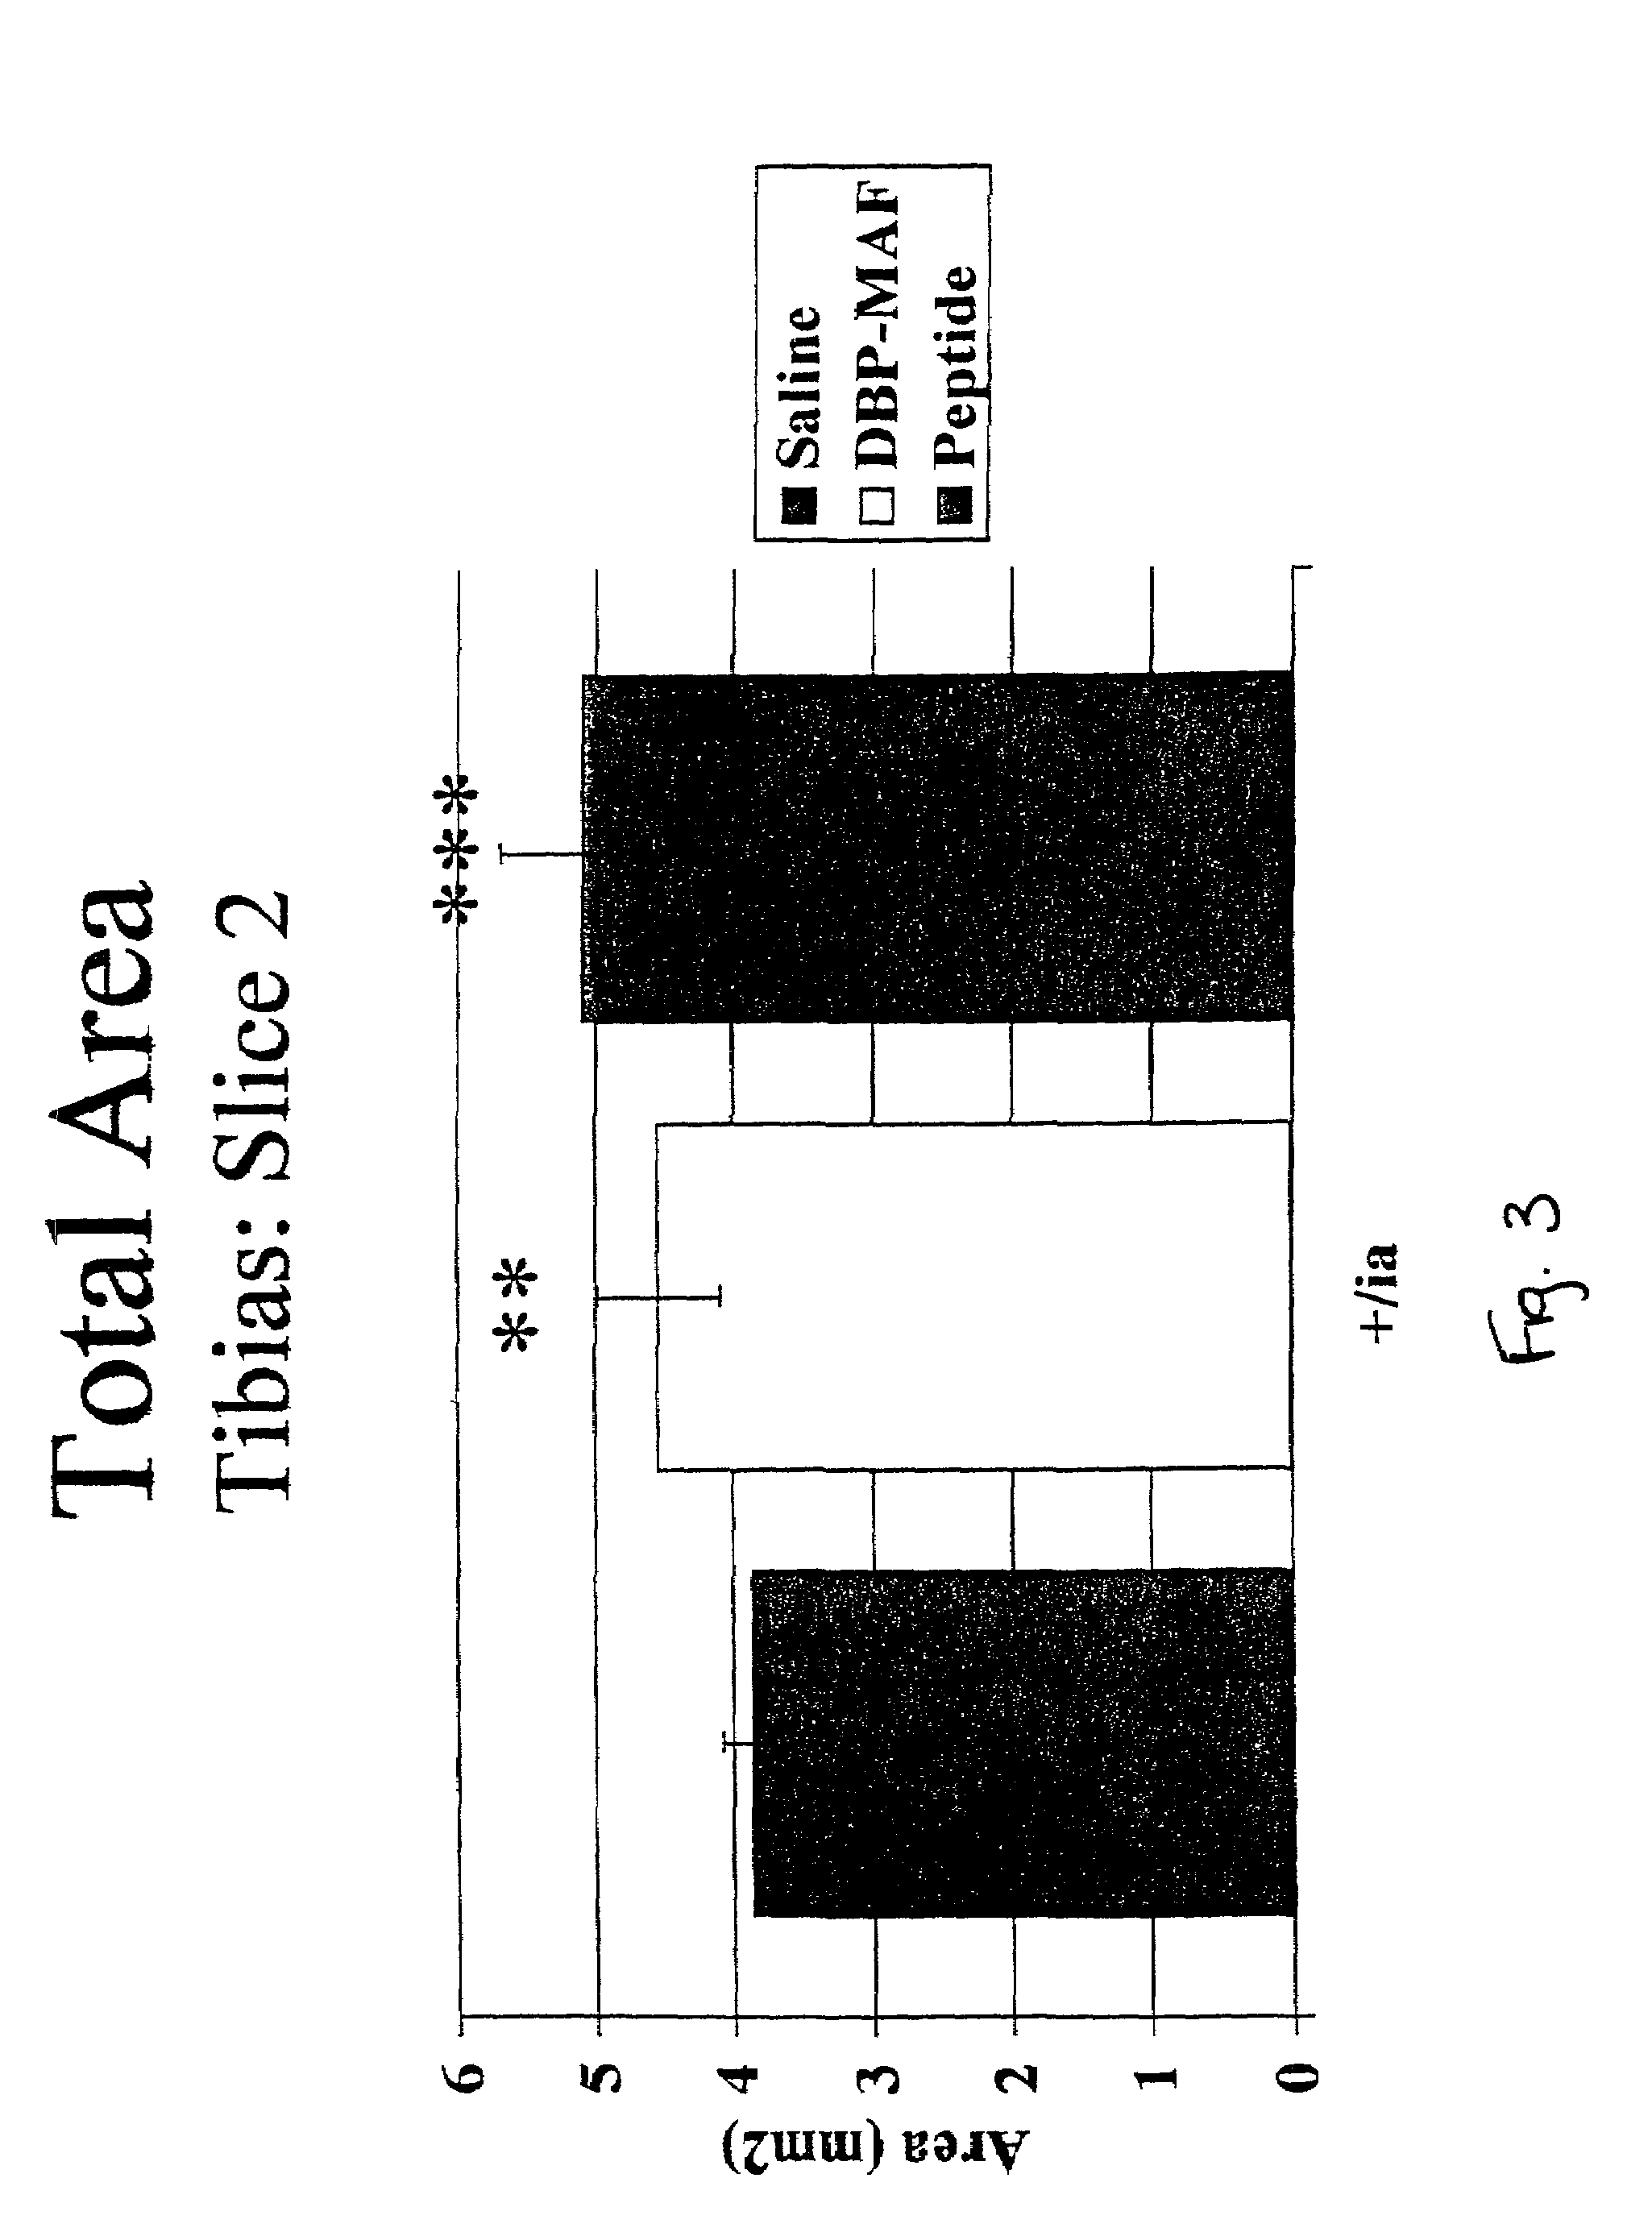 Agents and methods for promoting bone growth